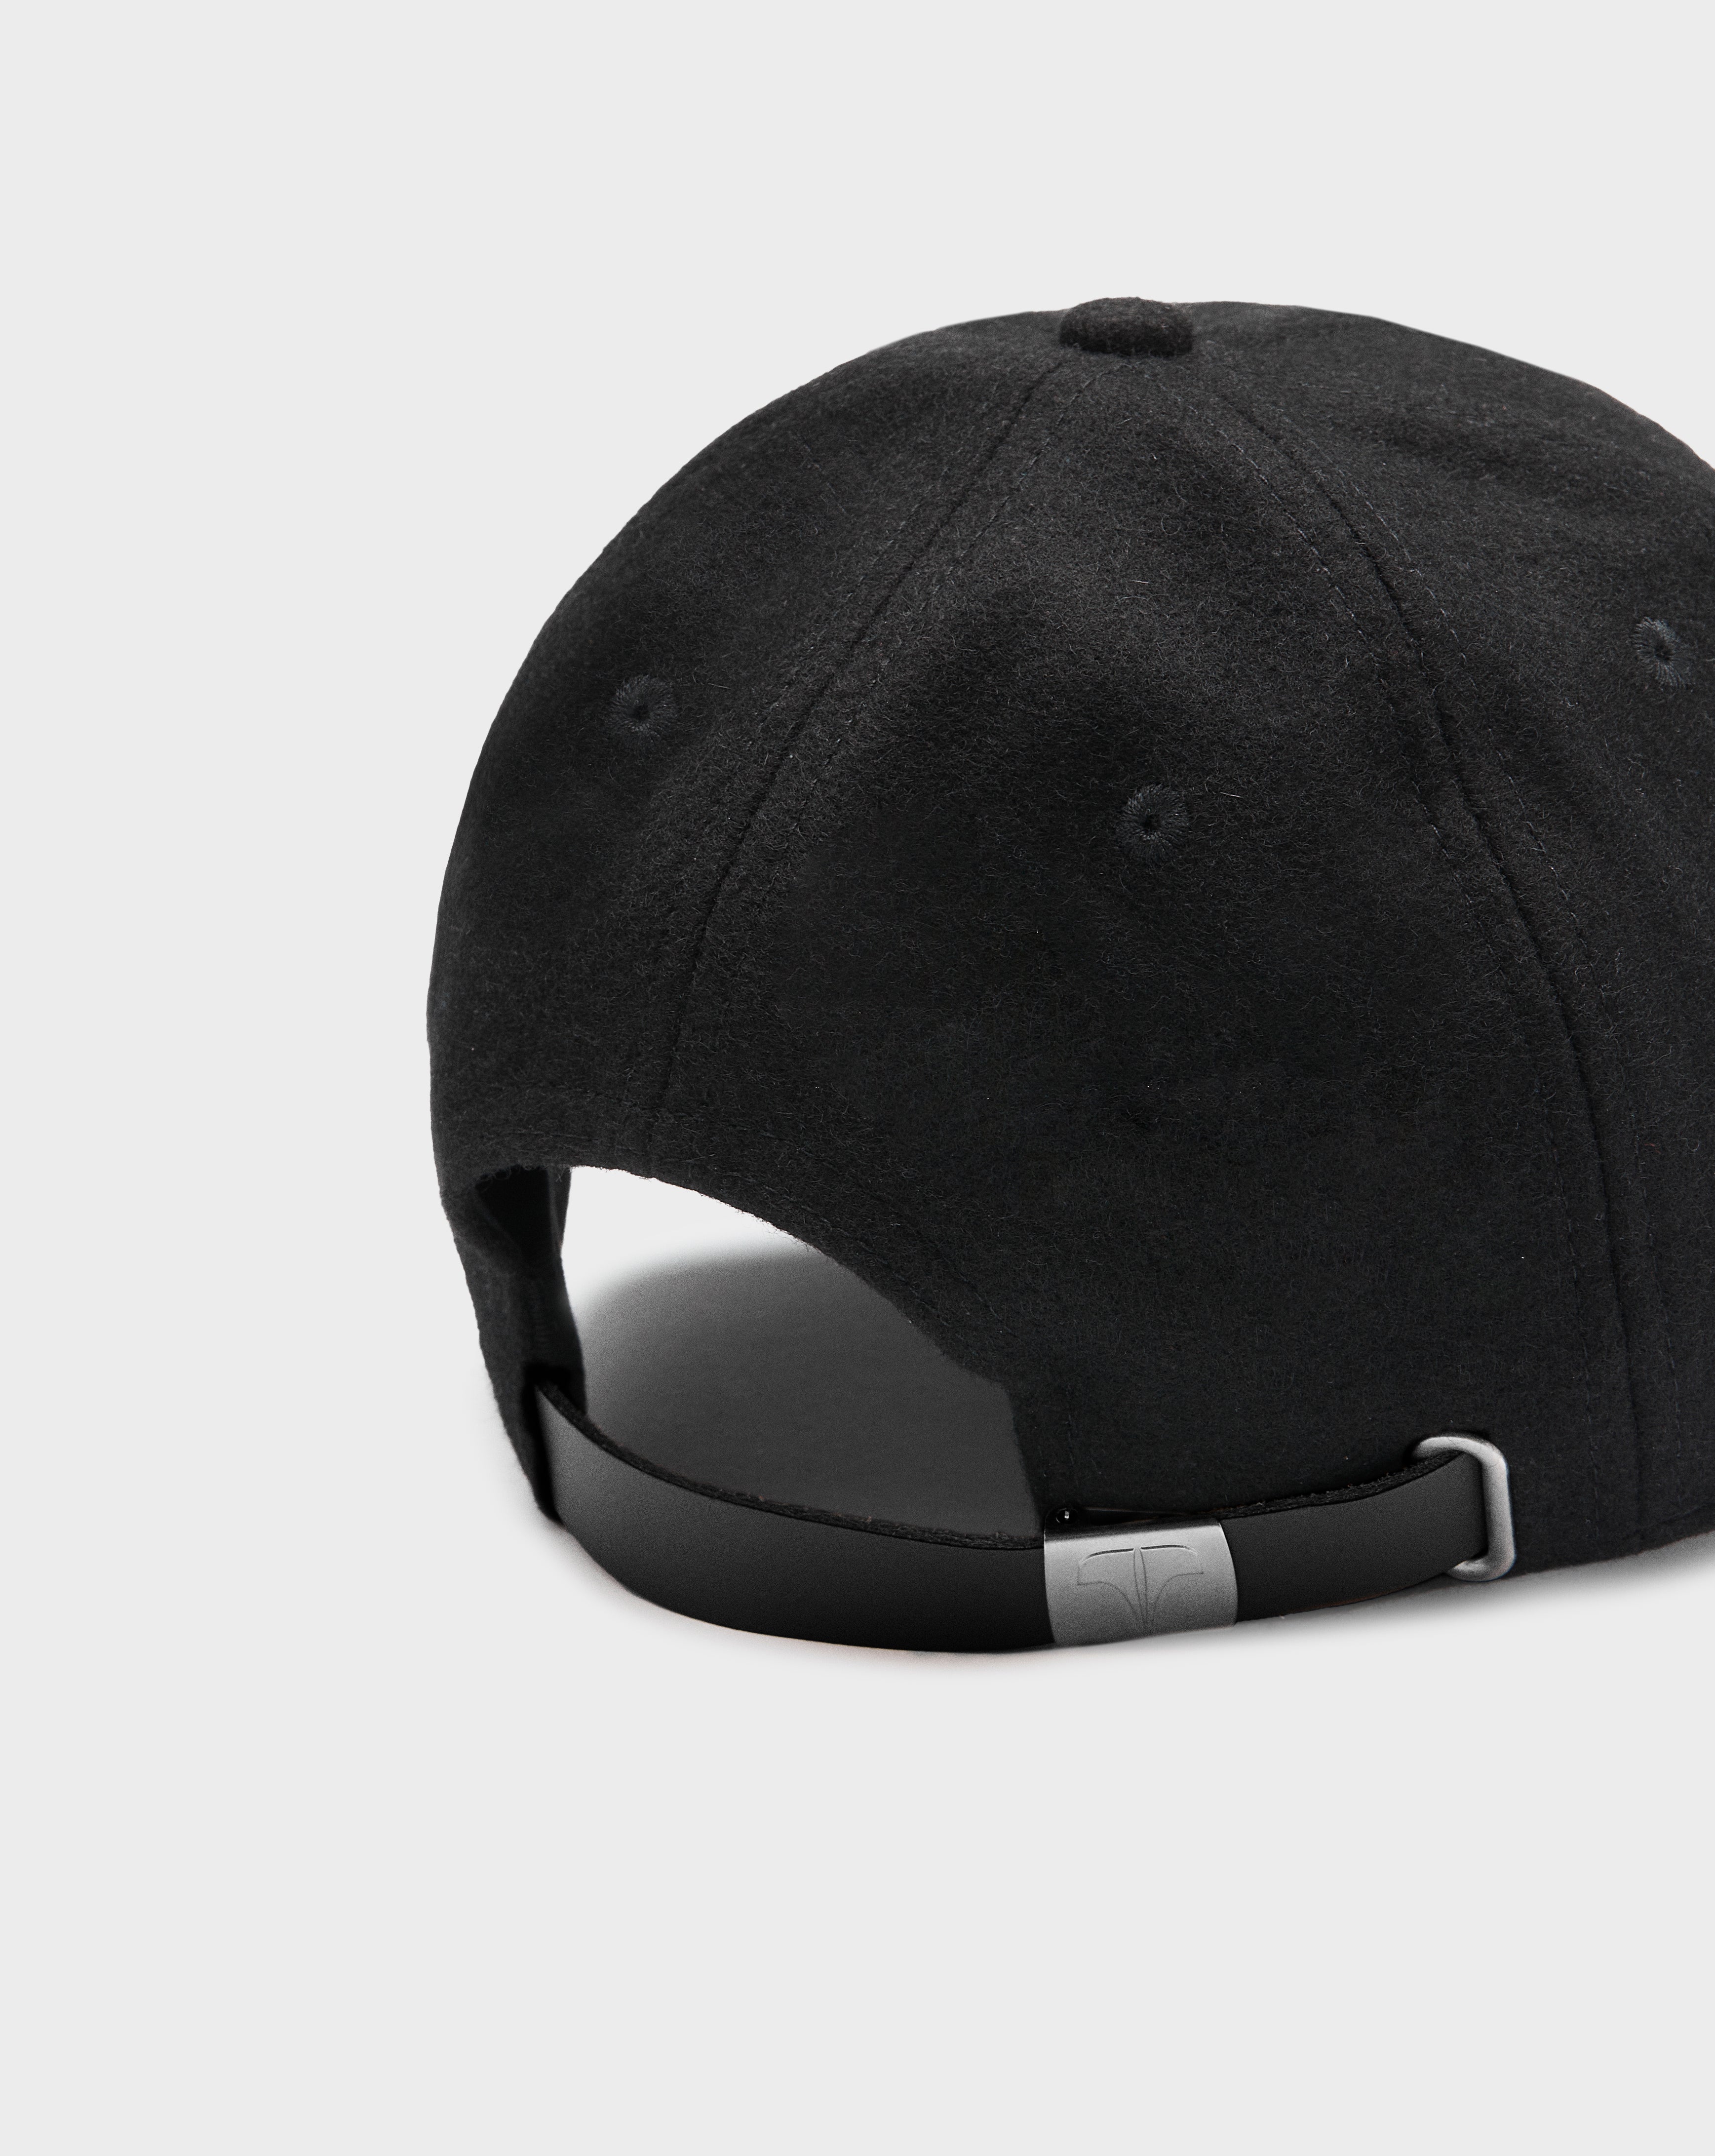 Twinzz black pitcher cap with small silver logo strap